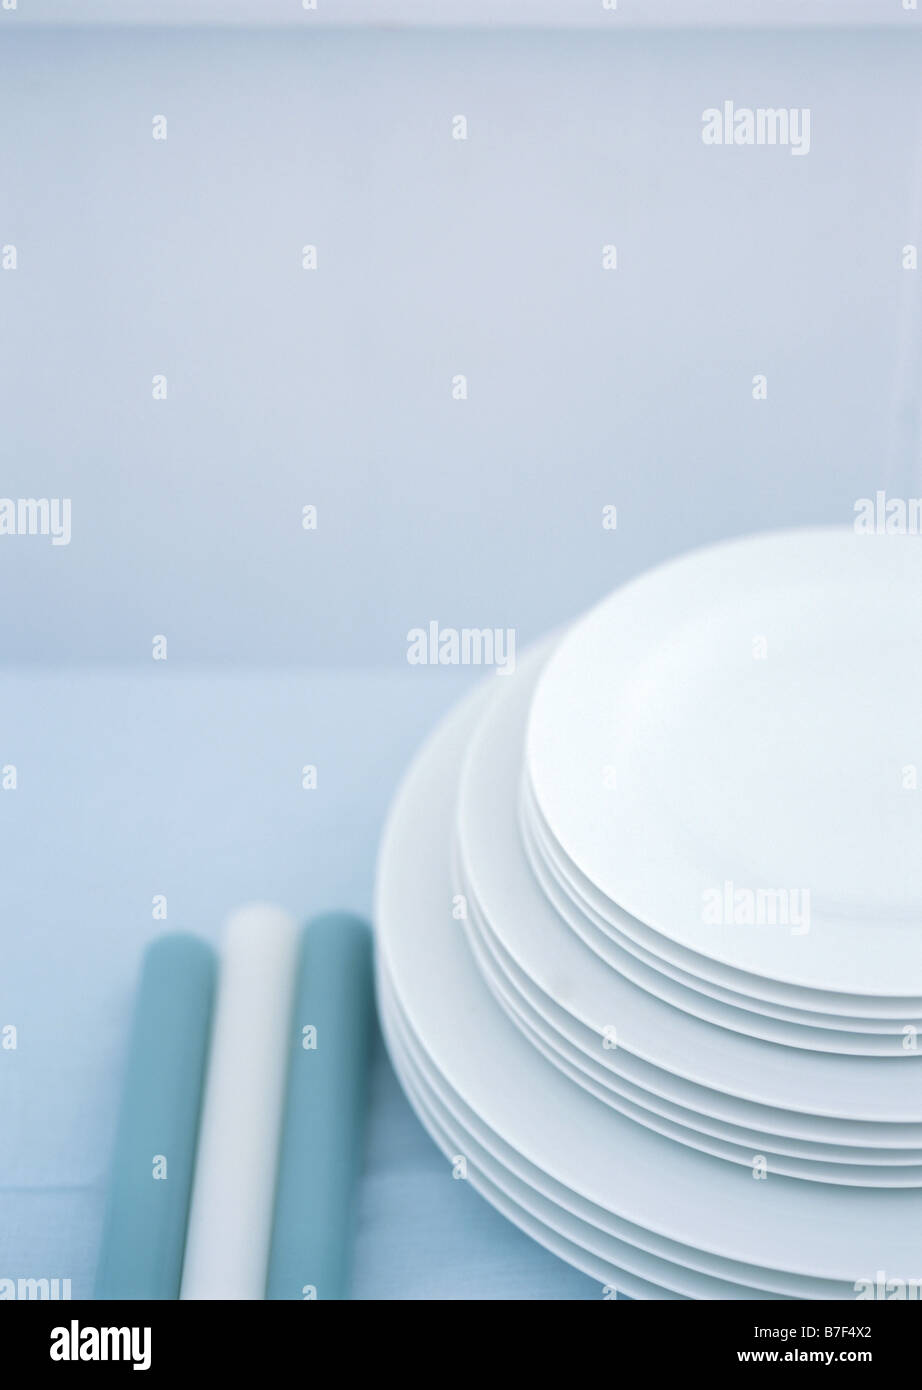 Candles and tablewear Stock Photo